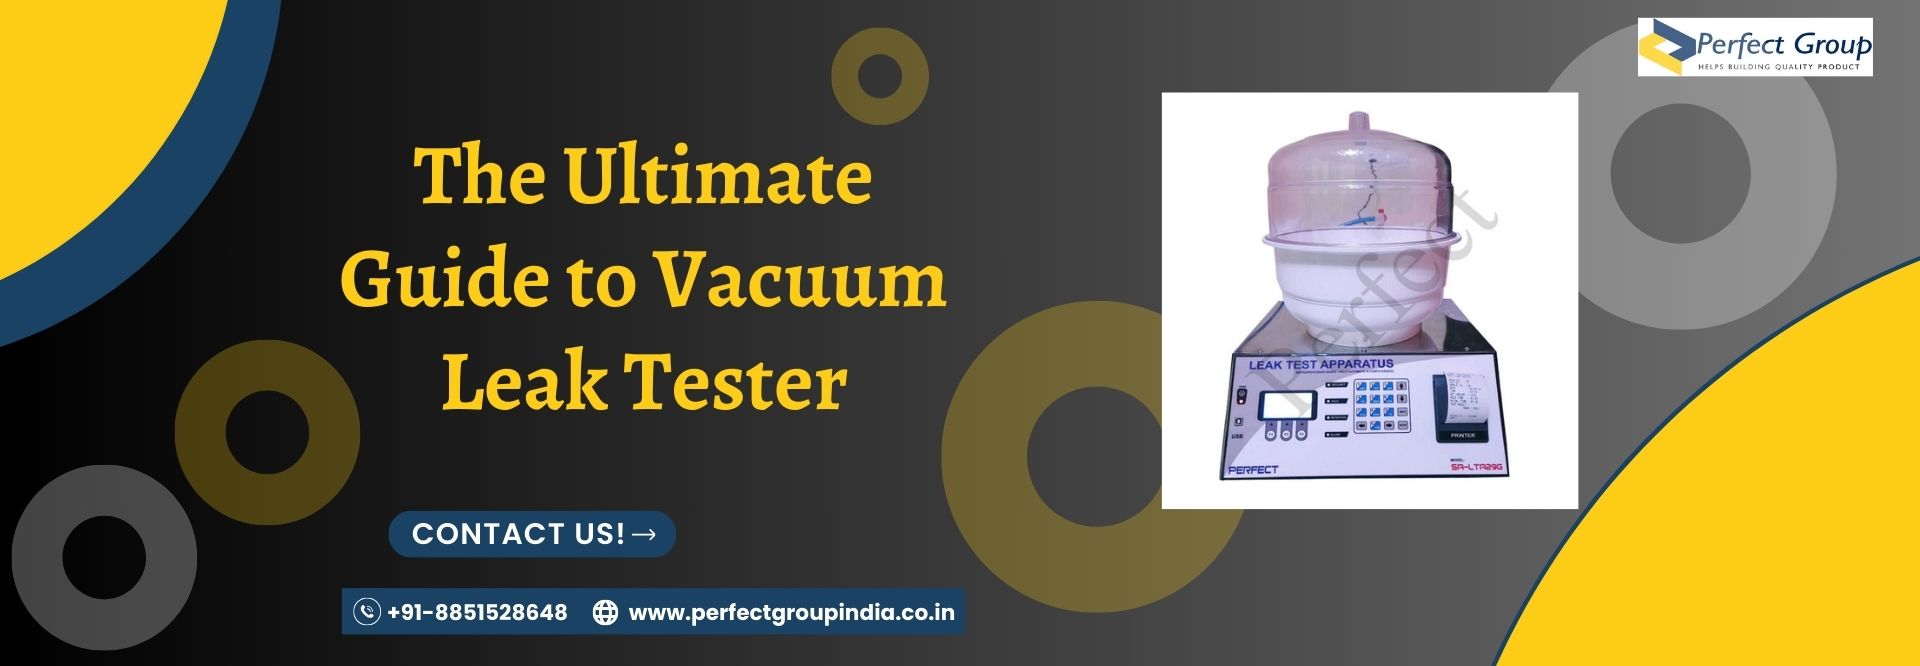 The Ultimate Guide to Vacuum Leak Tester